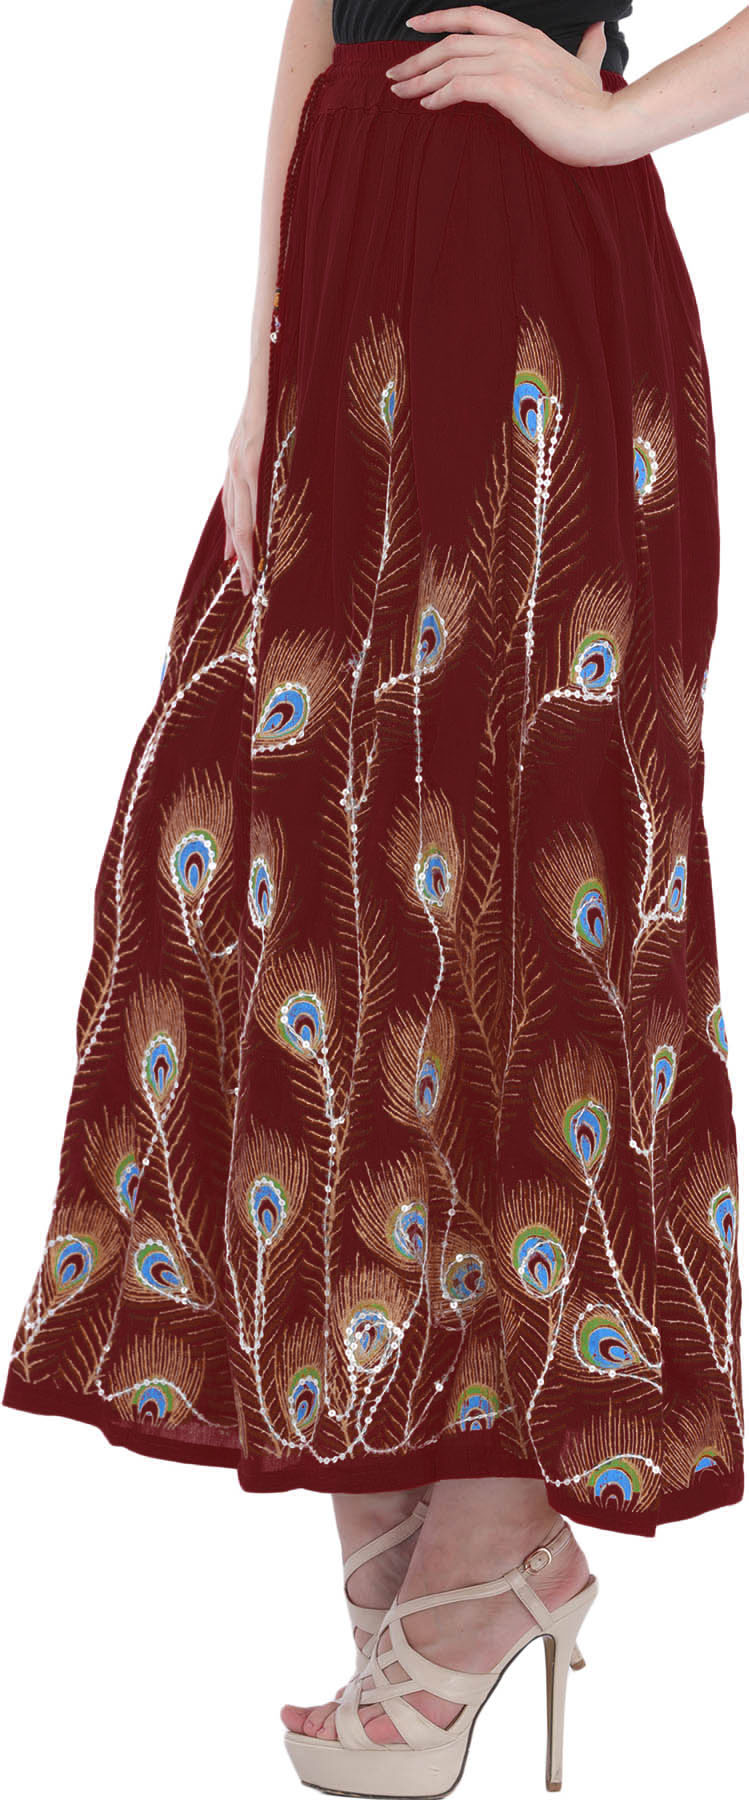 Peacock Skirt Kevin From UP - Etsy